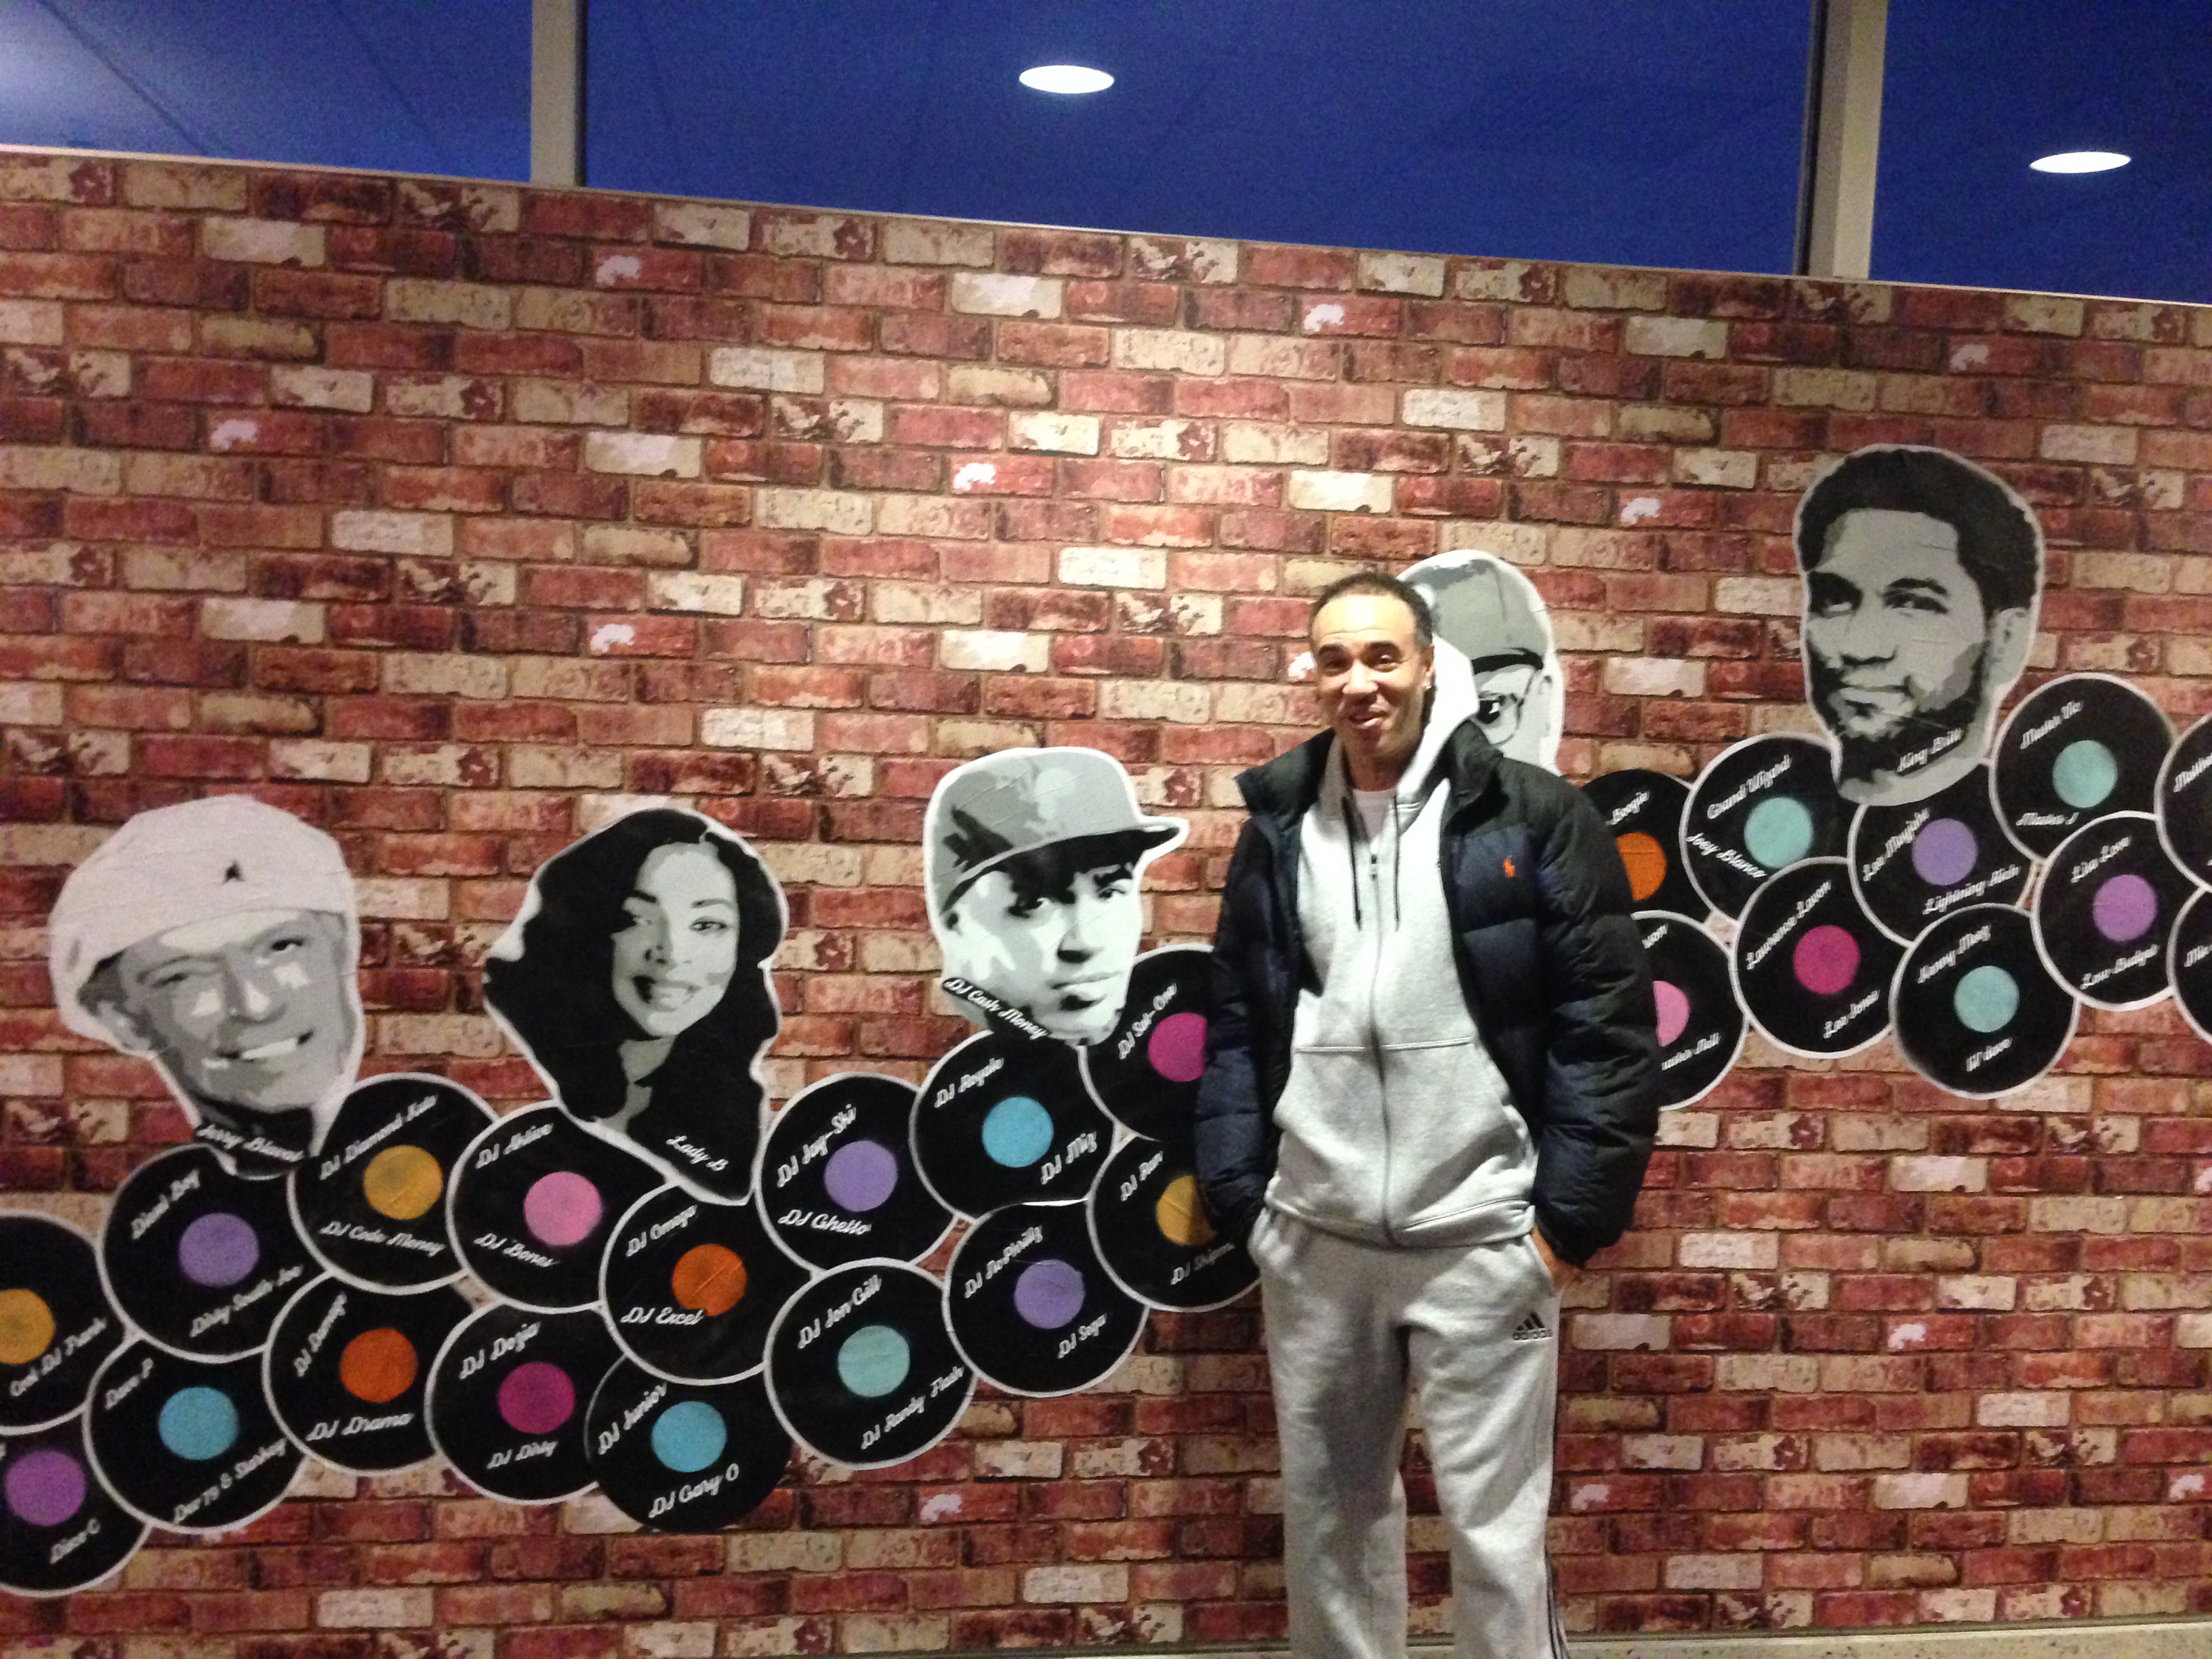 The Philadelphia DJ Mural @ Philadelphia Airport..(I have no words to say but to say humbly thank you..